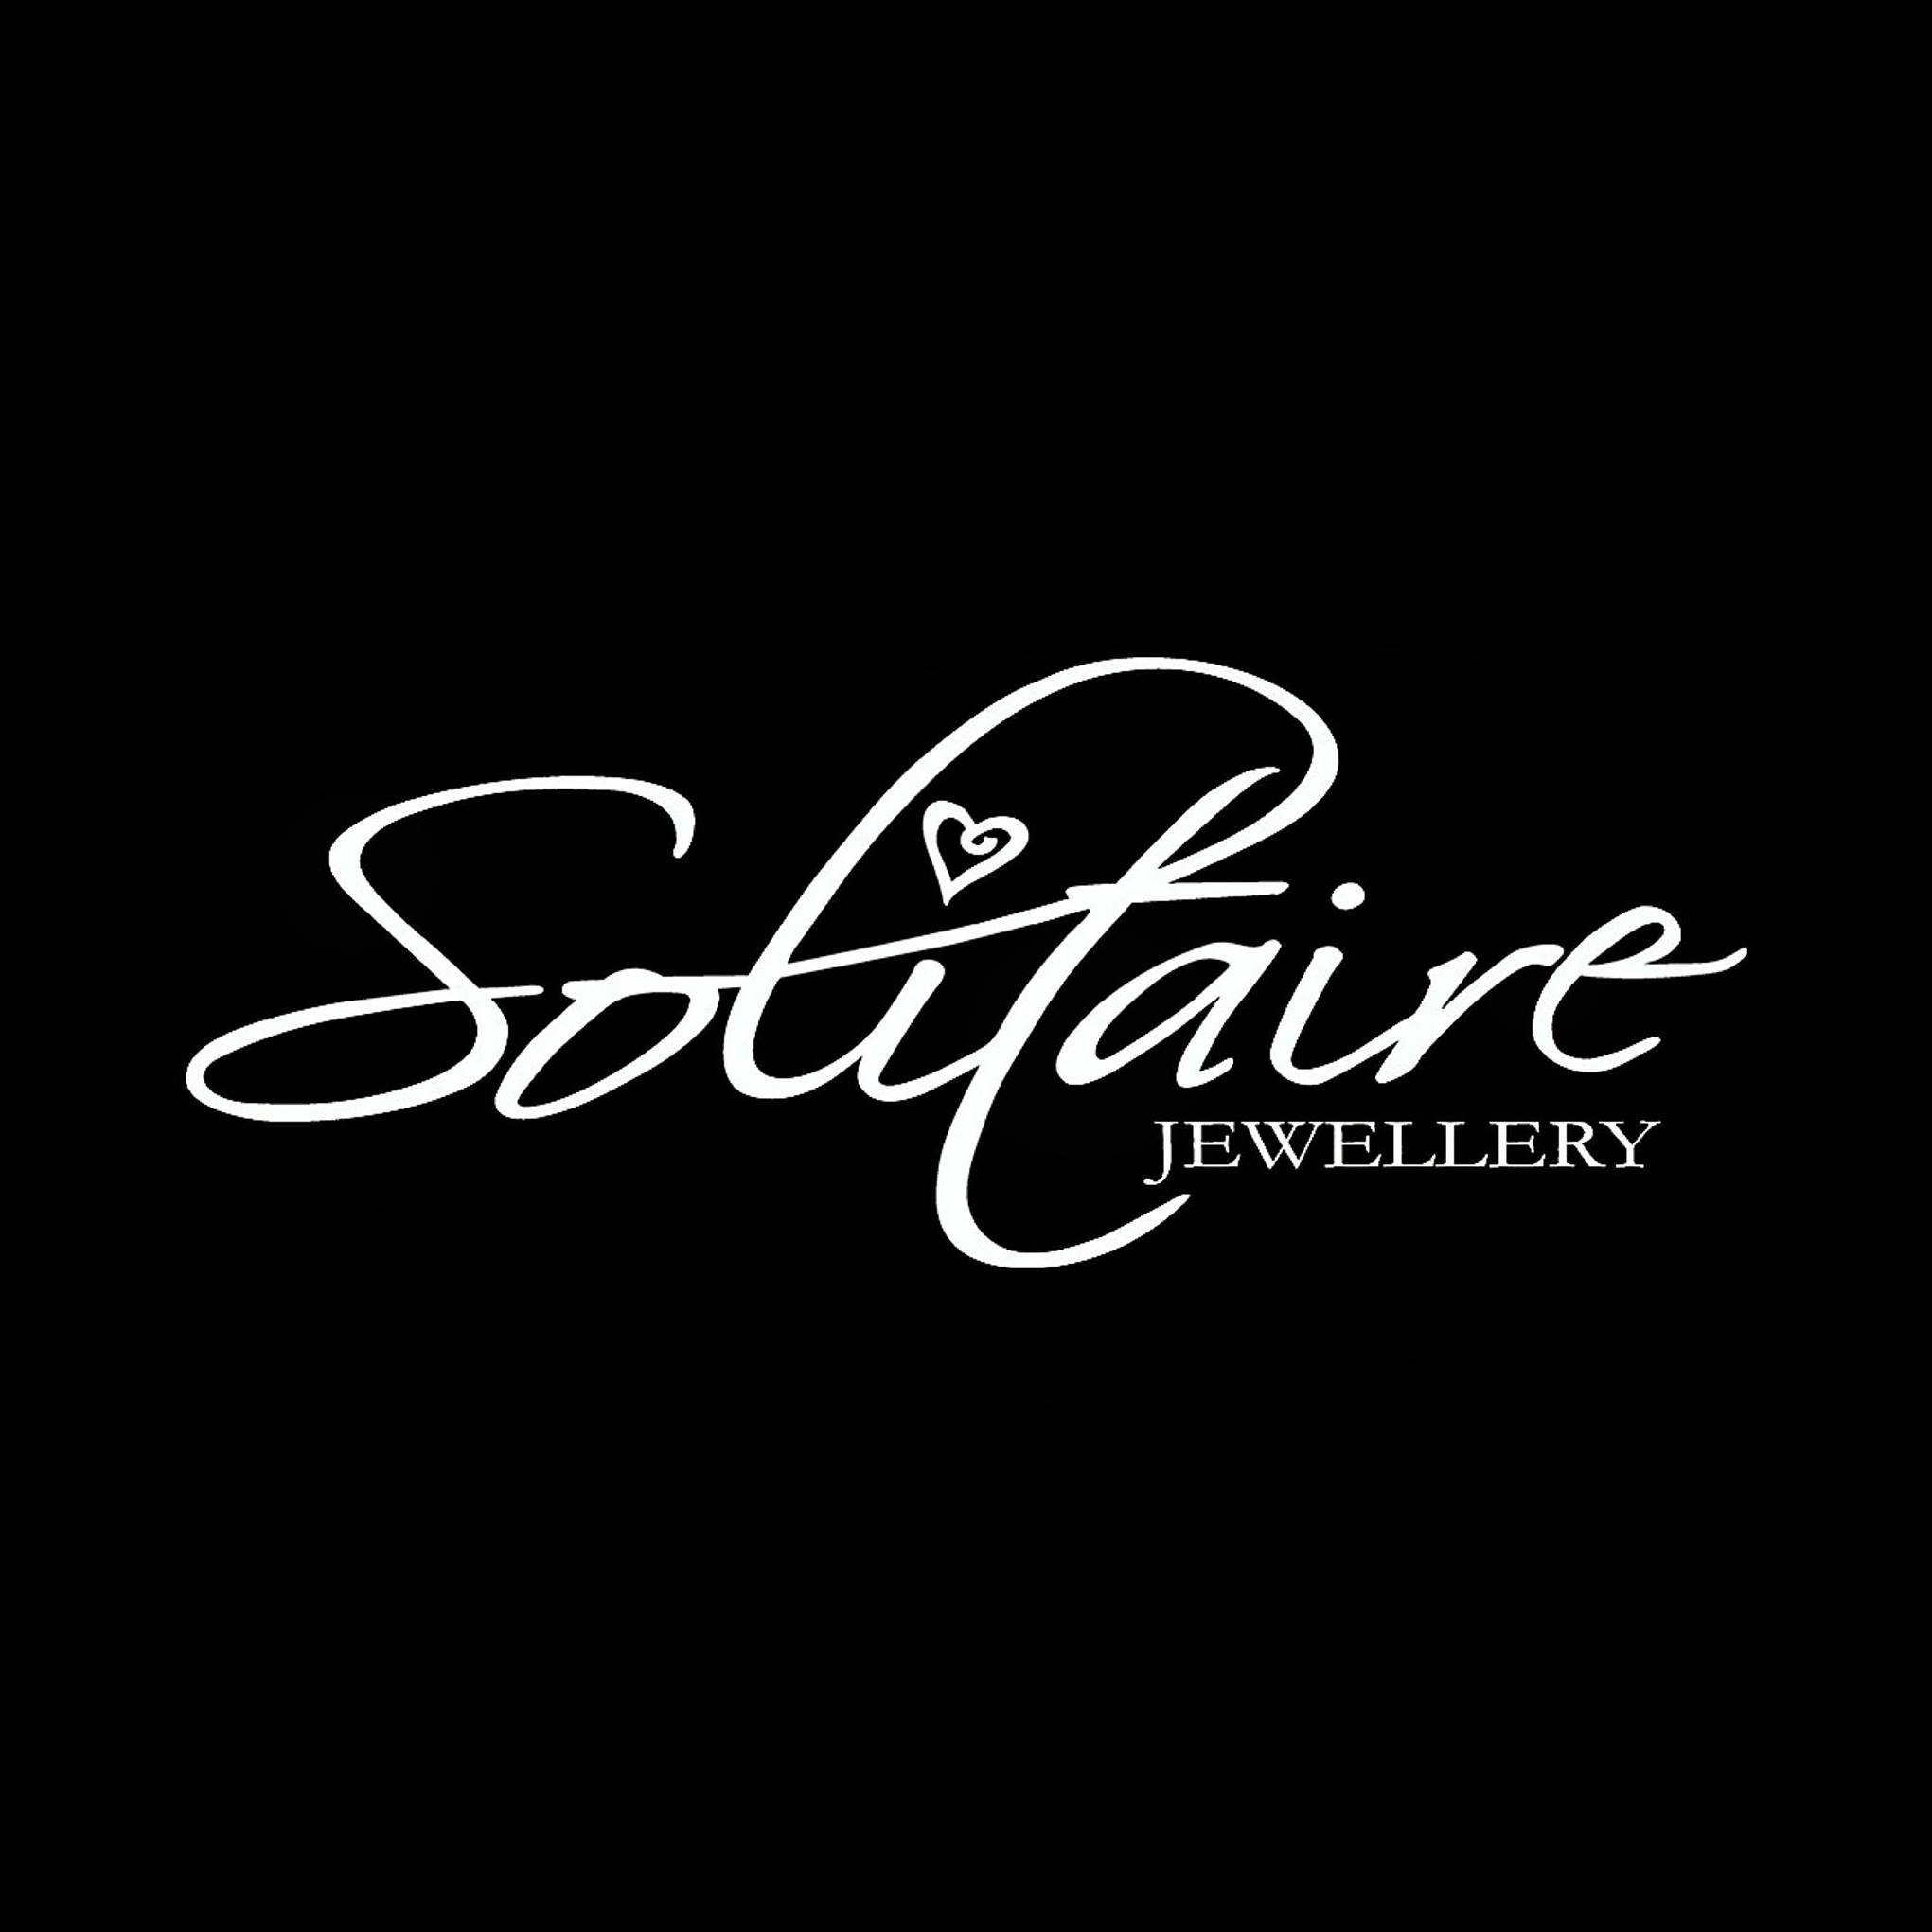 Company logo of Solitaire Jewellery